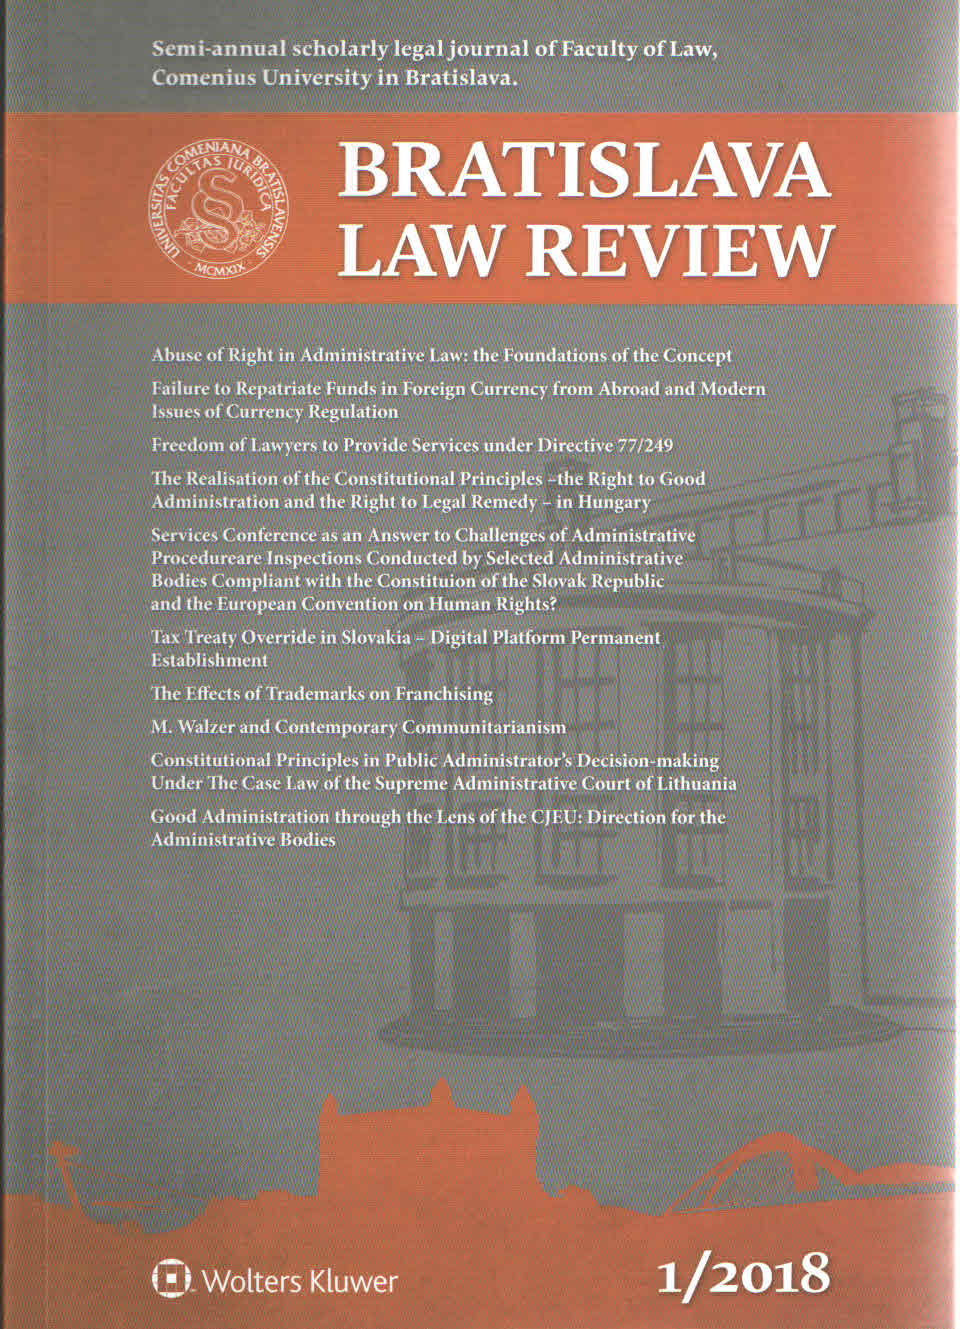 CONSTITUTIONAL PRINCIPLES IN PUBLIC ADMINISTRATOR’S DECISION-MAKING UNDER THE CASE LAW OF THE SUPREME ADMINISTRATIVE COURT OF LITHUANIA Cover Image